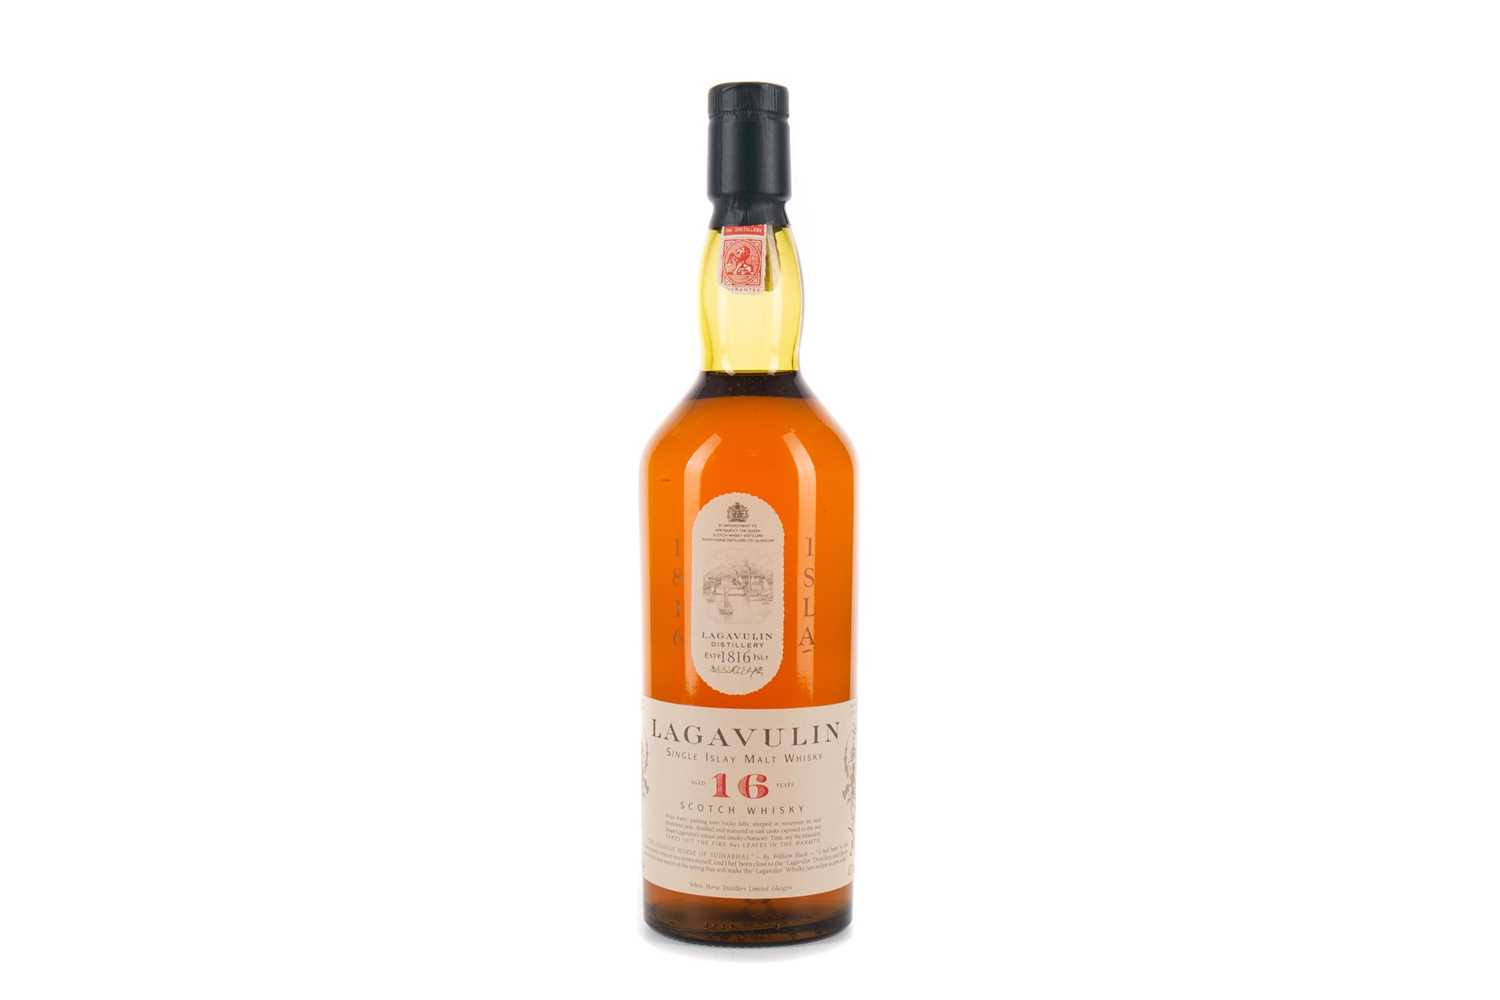 Lot 152 - LAGAVULIN AGED 16 YEARS WHITE HORSE DISTILLERS